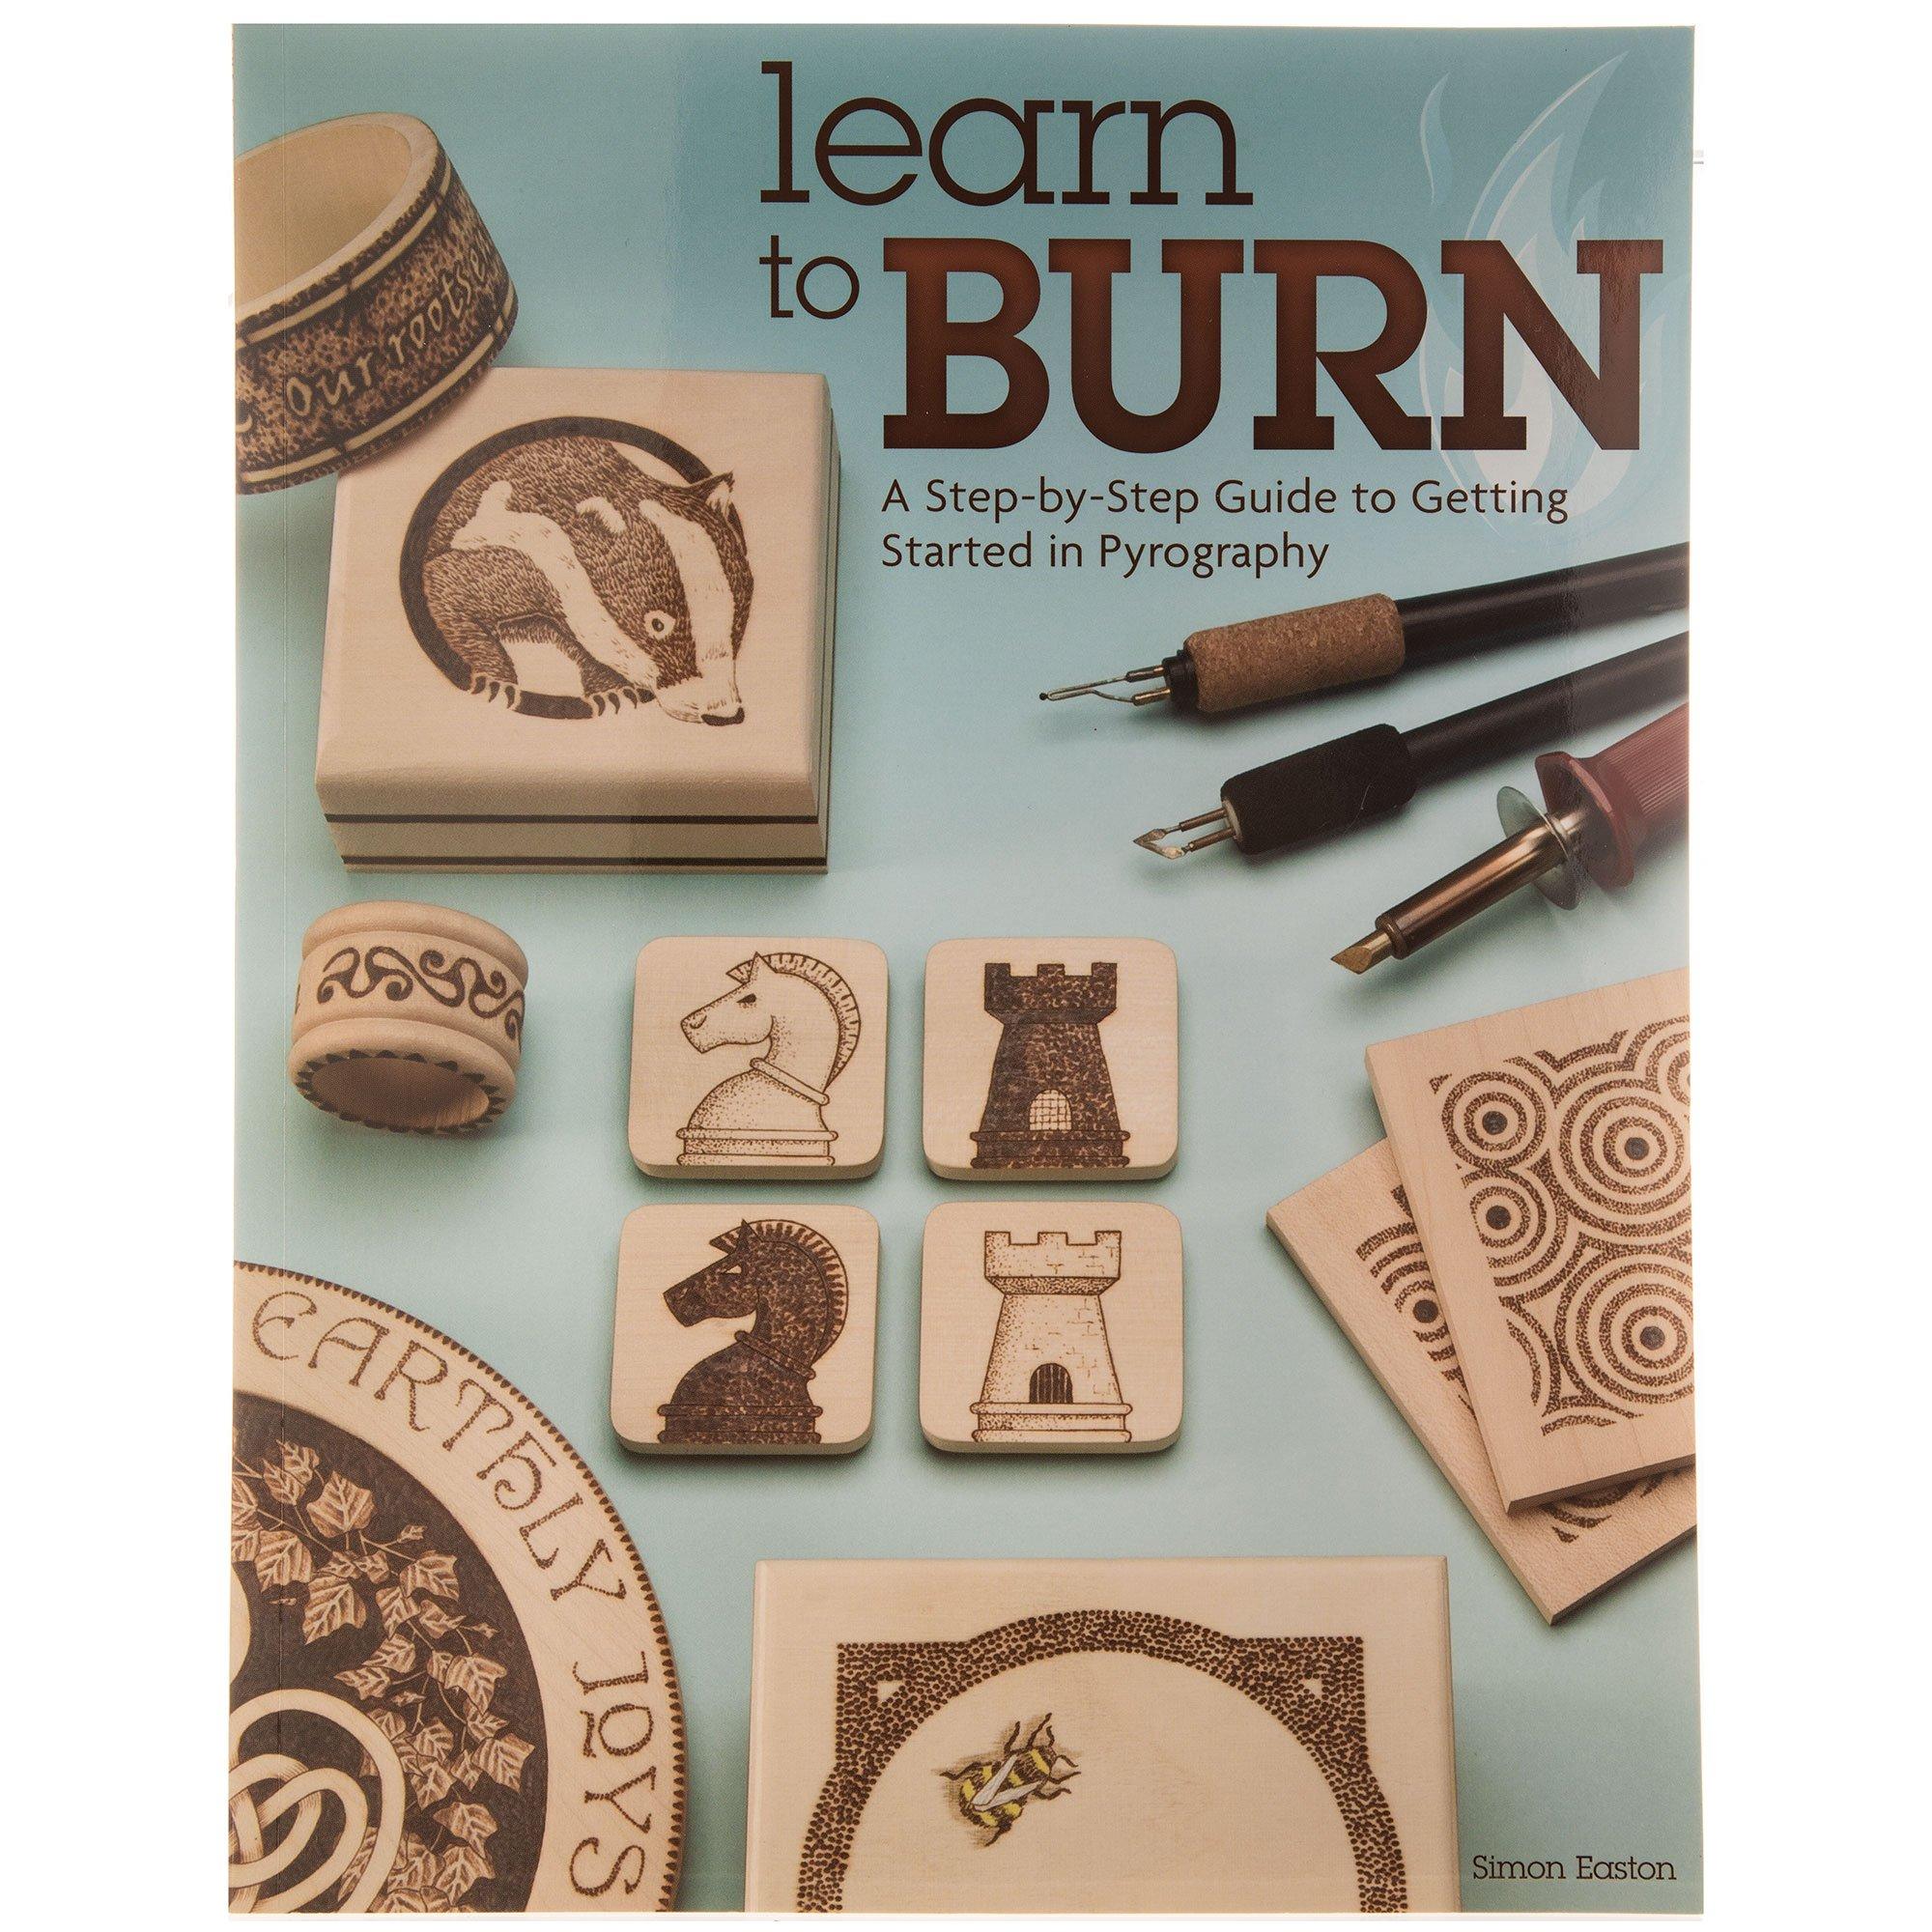 The Wood Burn Book: An Essential Guide to the Art of Pyrography (Paperback)